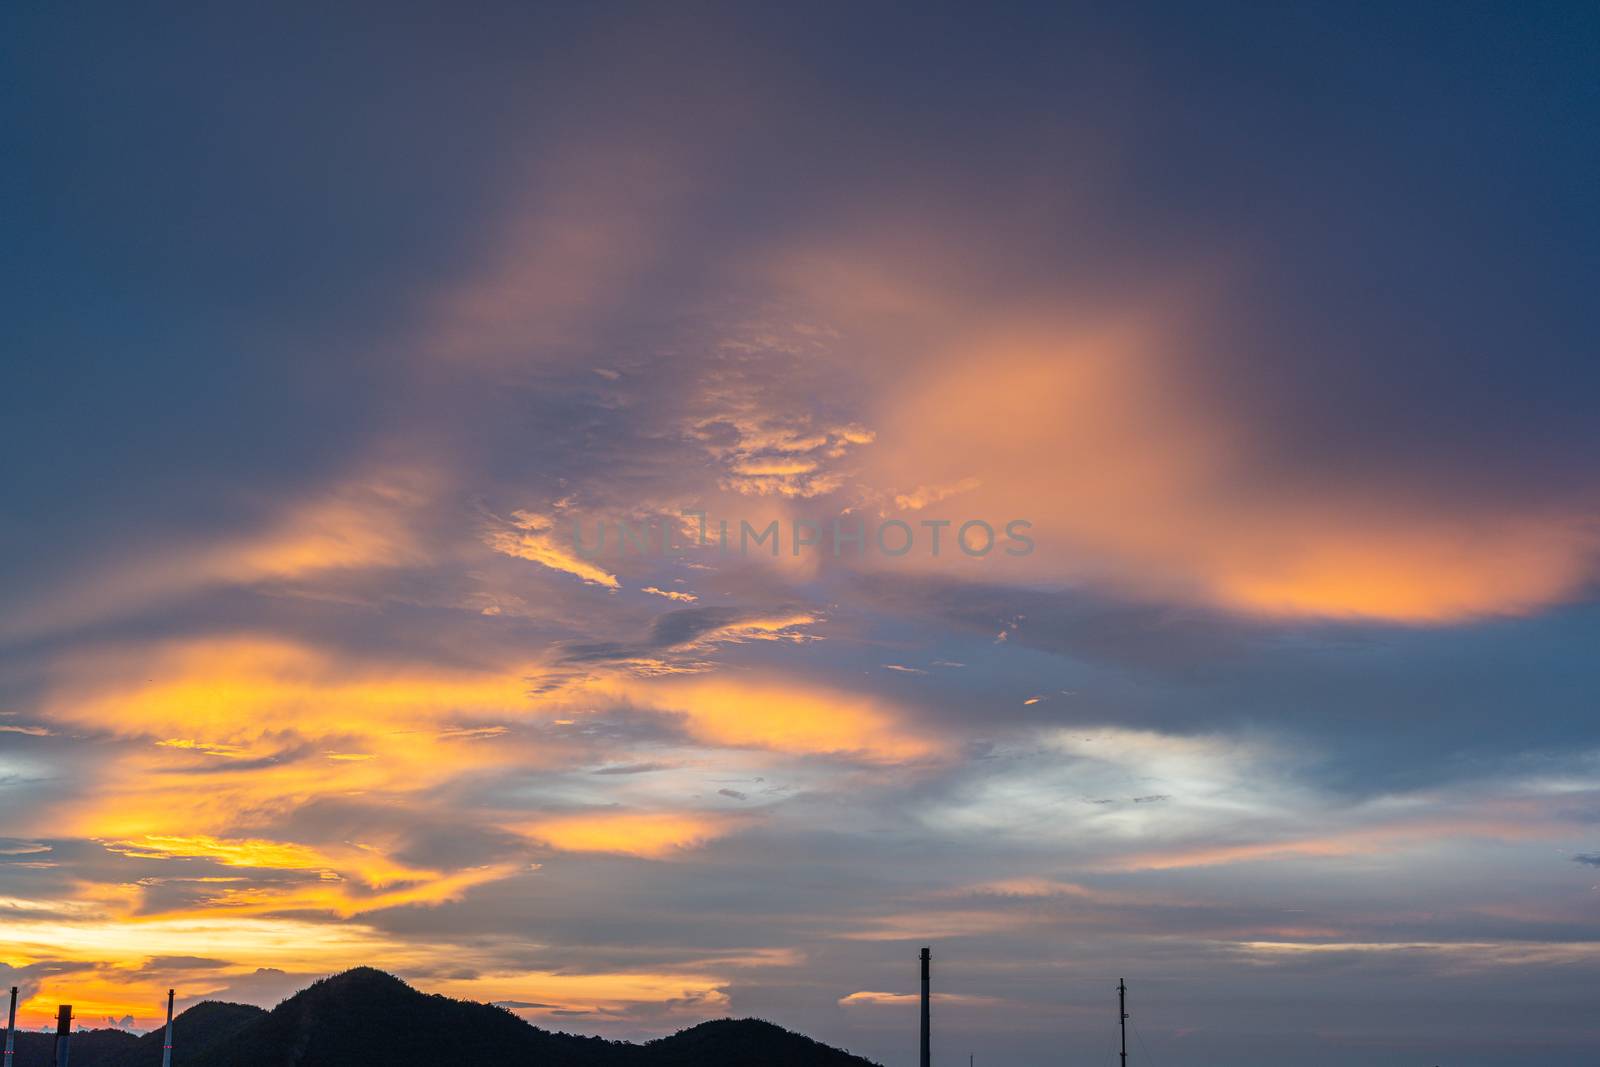 The Bright orange and gold colors of the sunset sky. Summer sky with clouds during the sunset, landscape with a sky view over the hill